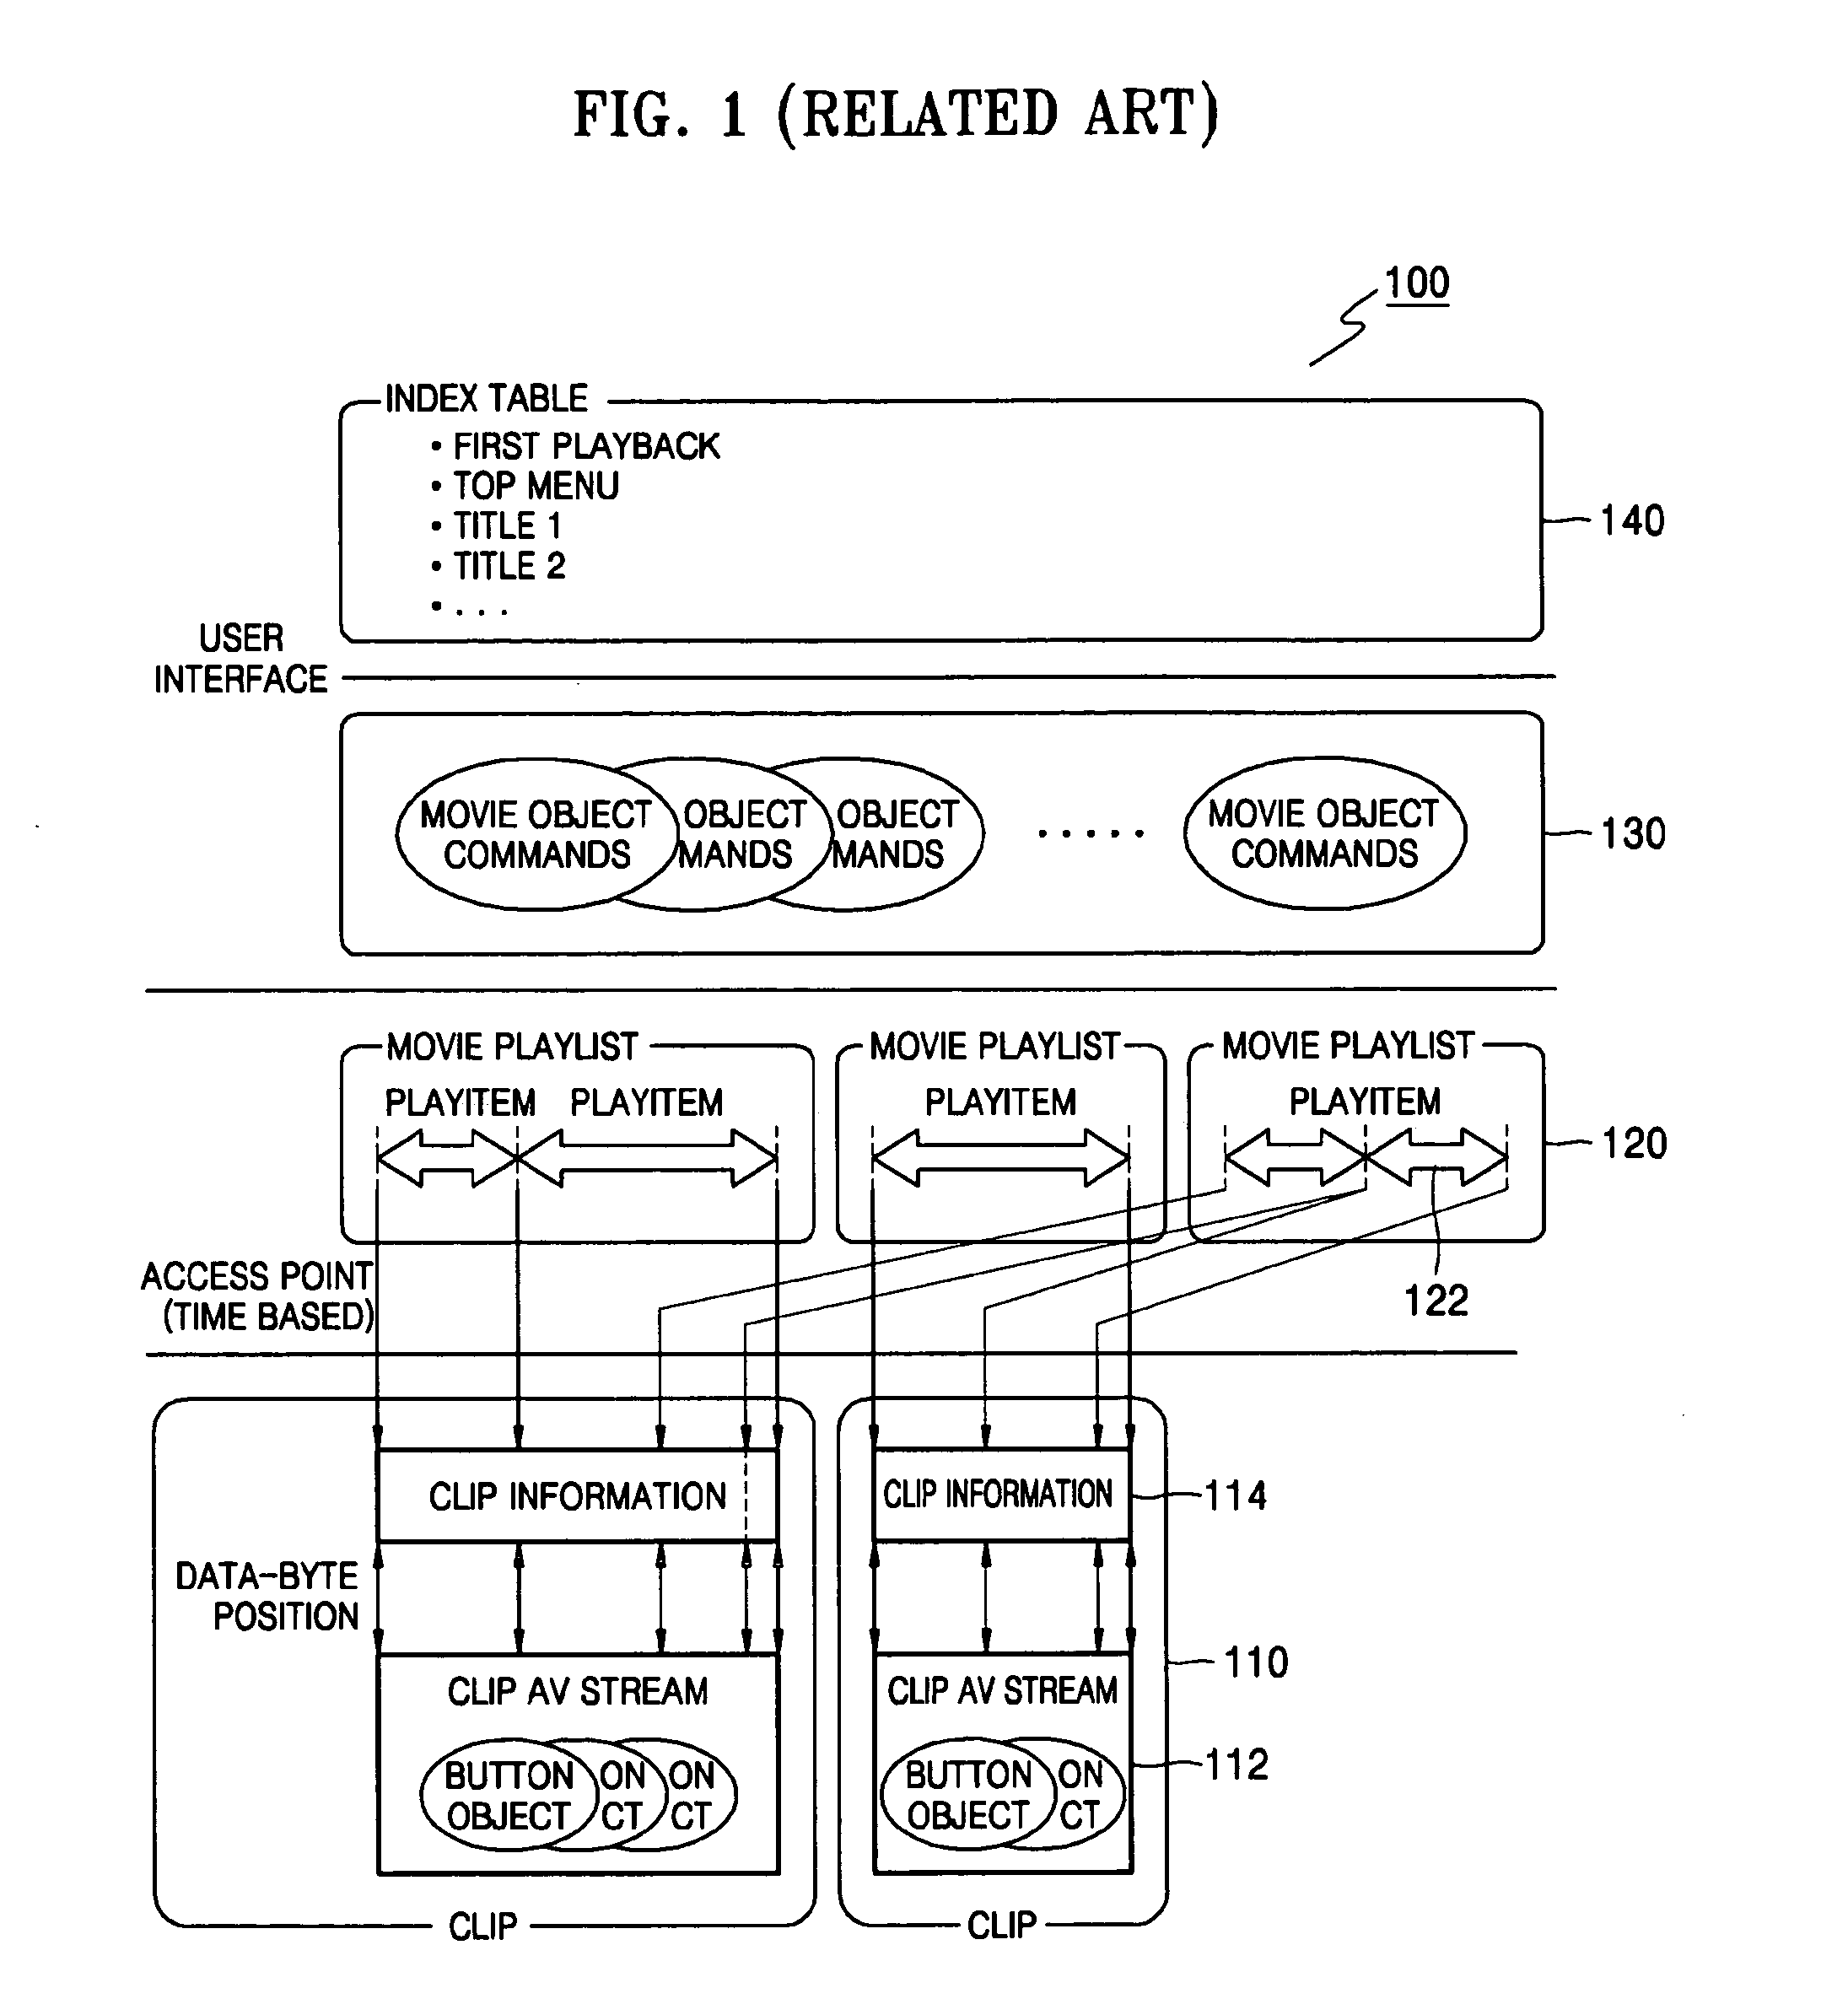 Apparatus and method for reproducing storage medium that stores metadata for providing enhanced search function